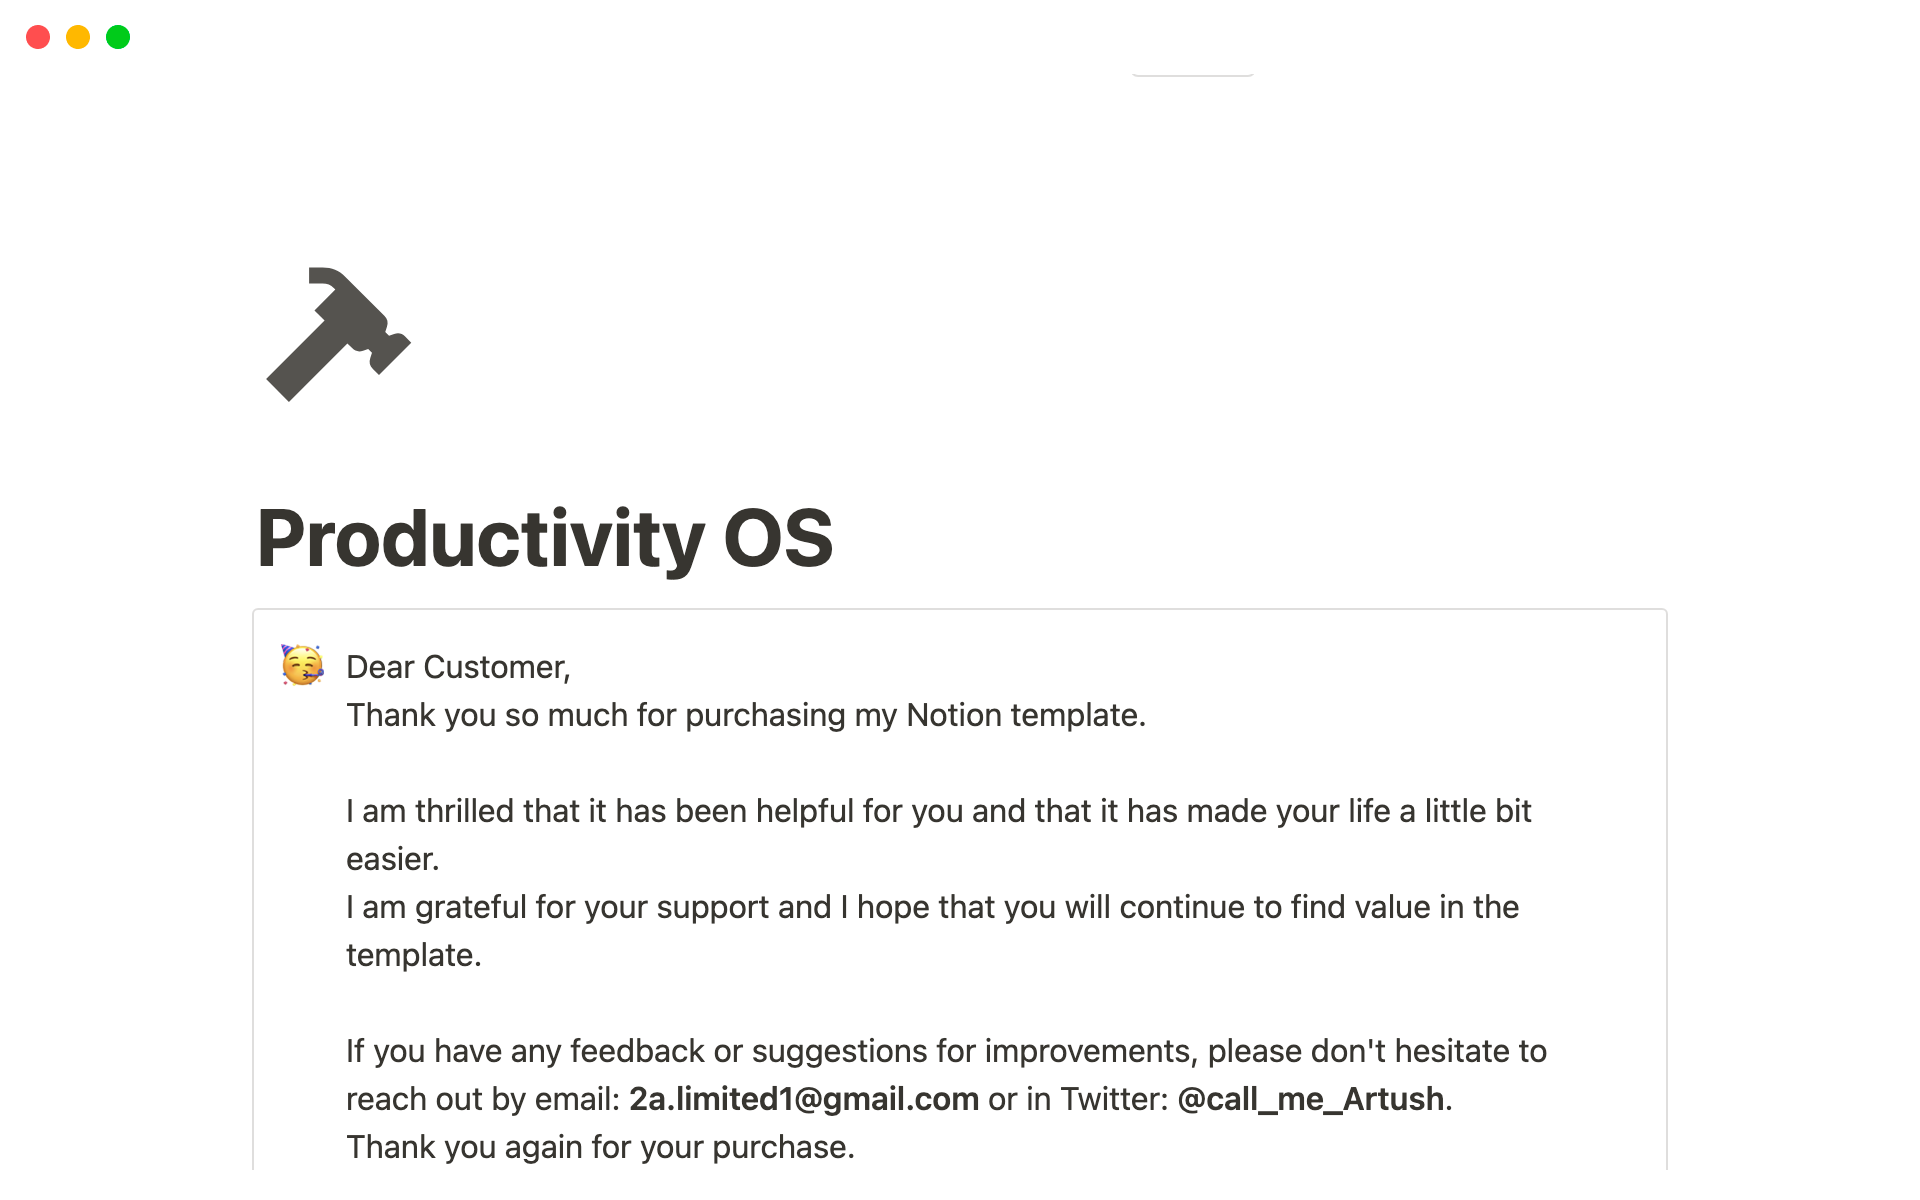 Sends your productivity to the moon.